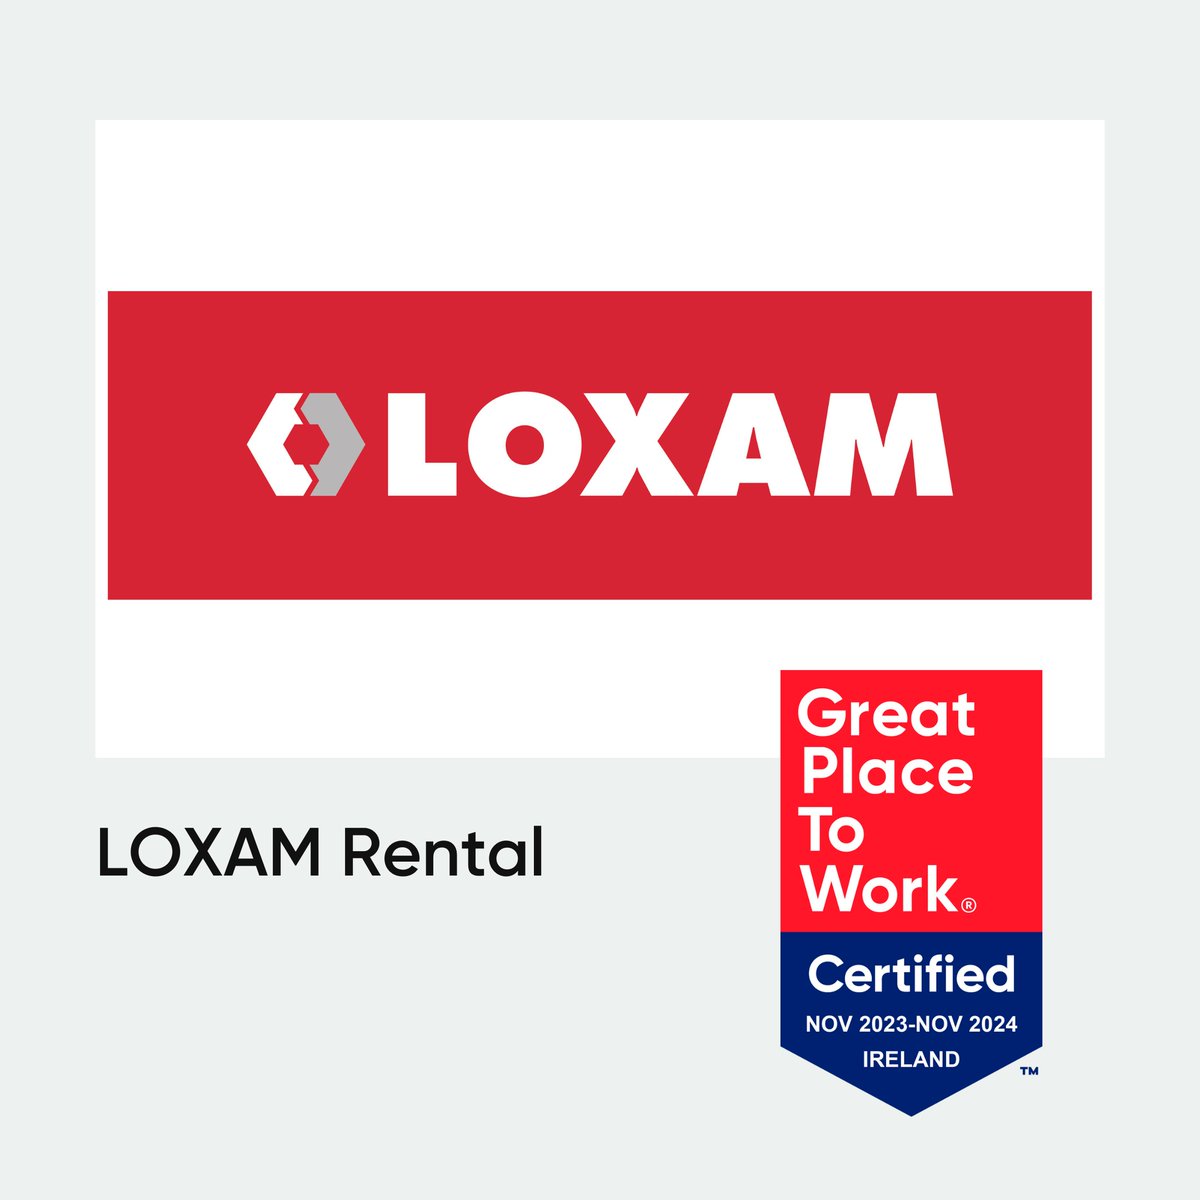 CERTIFICATION 🏅| Congratulations to LOXAM Rental for being Certified™ as a #greatplacetowork! Well done to the team for this amazing achievement! 

Check out all the Certified™ organisations 👉 hubs.li/Q02n84fx0

#gptw #gptwcertified #certifiedgreat